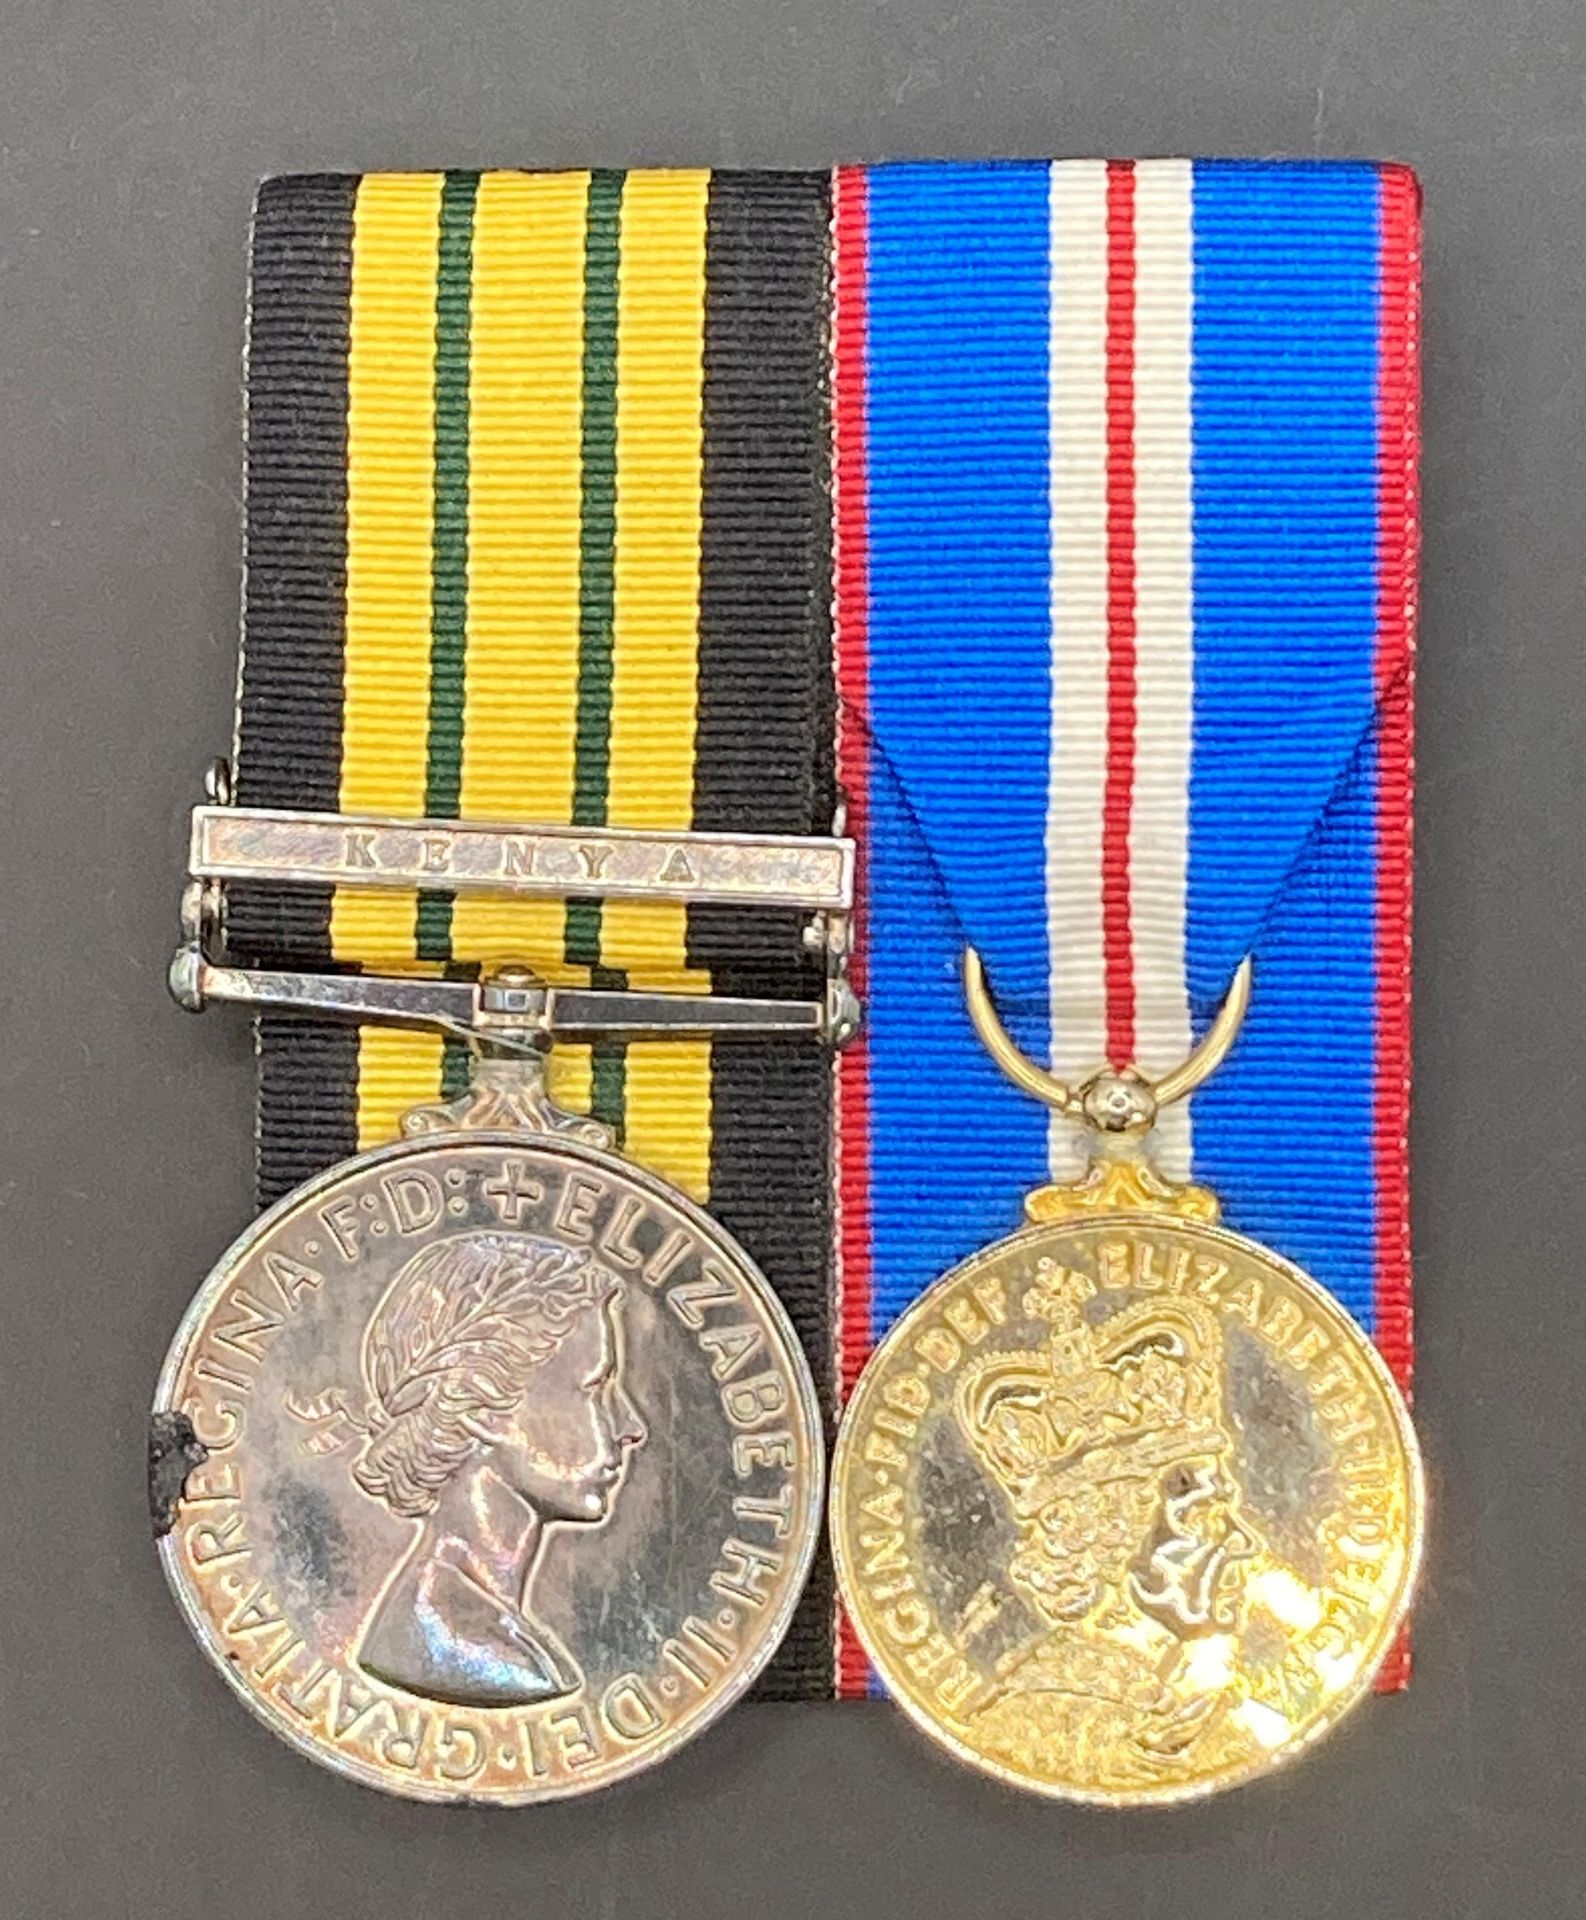 Africa General Service Medal (Queen Elizabeth II) complete with ribbon and clasp for Kenya and a - Image 2 of 4